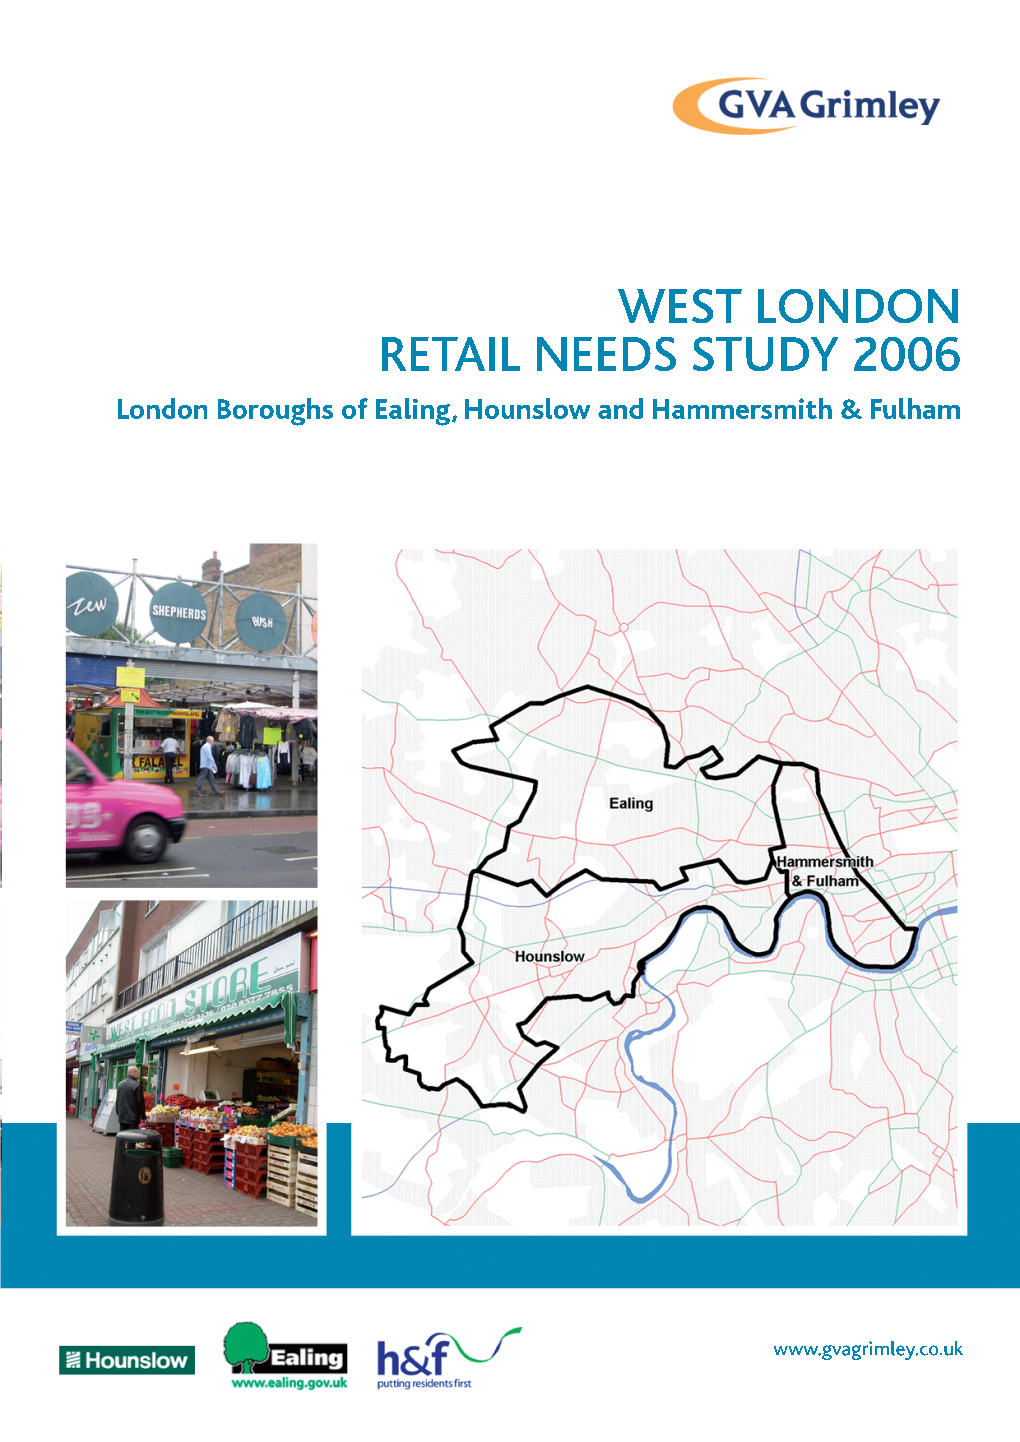 WEST LONDON RETAIL NEEDS STUDY 2006 London Boroughs of Ealing, Hounslow and Hammersmith & Fulham